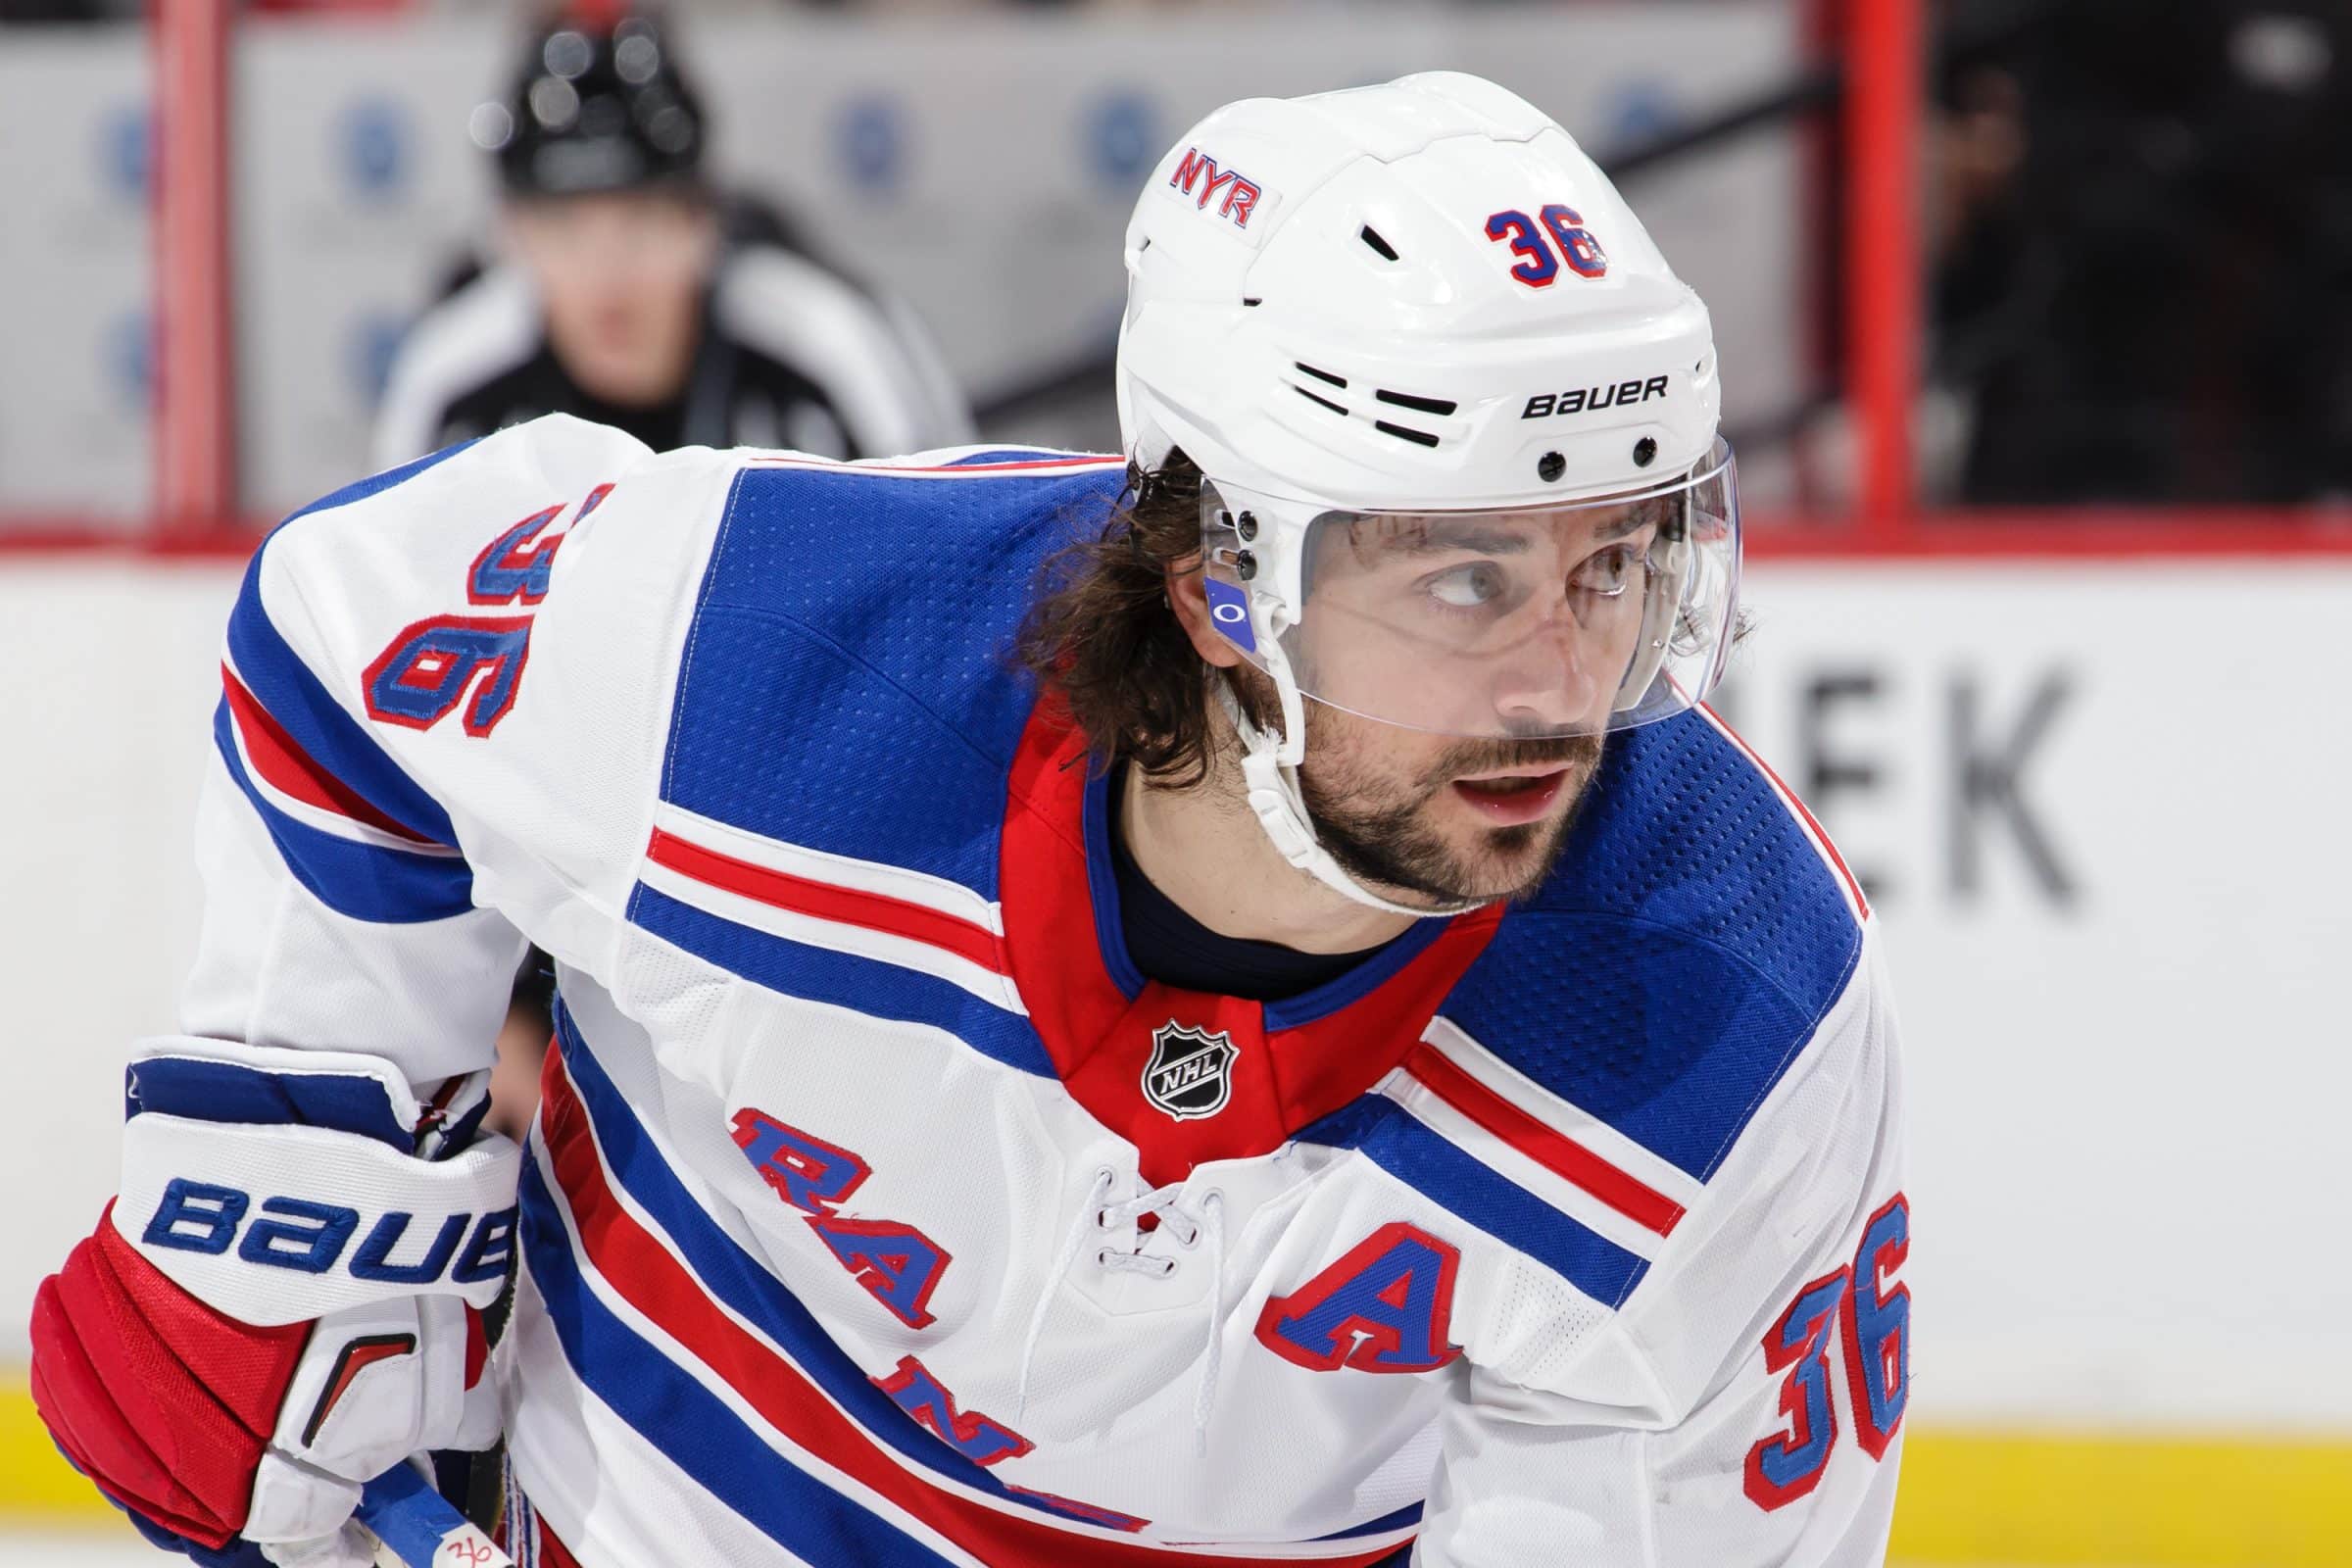 What does Mats Zuccarello's future have in store?